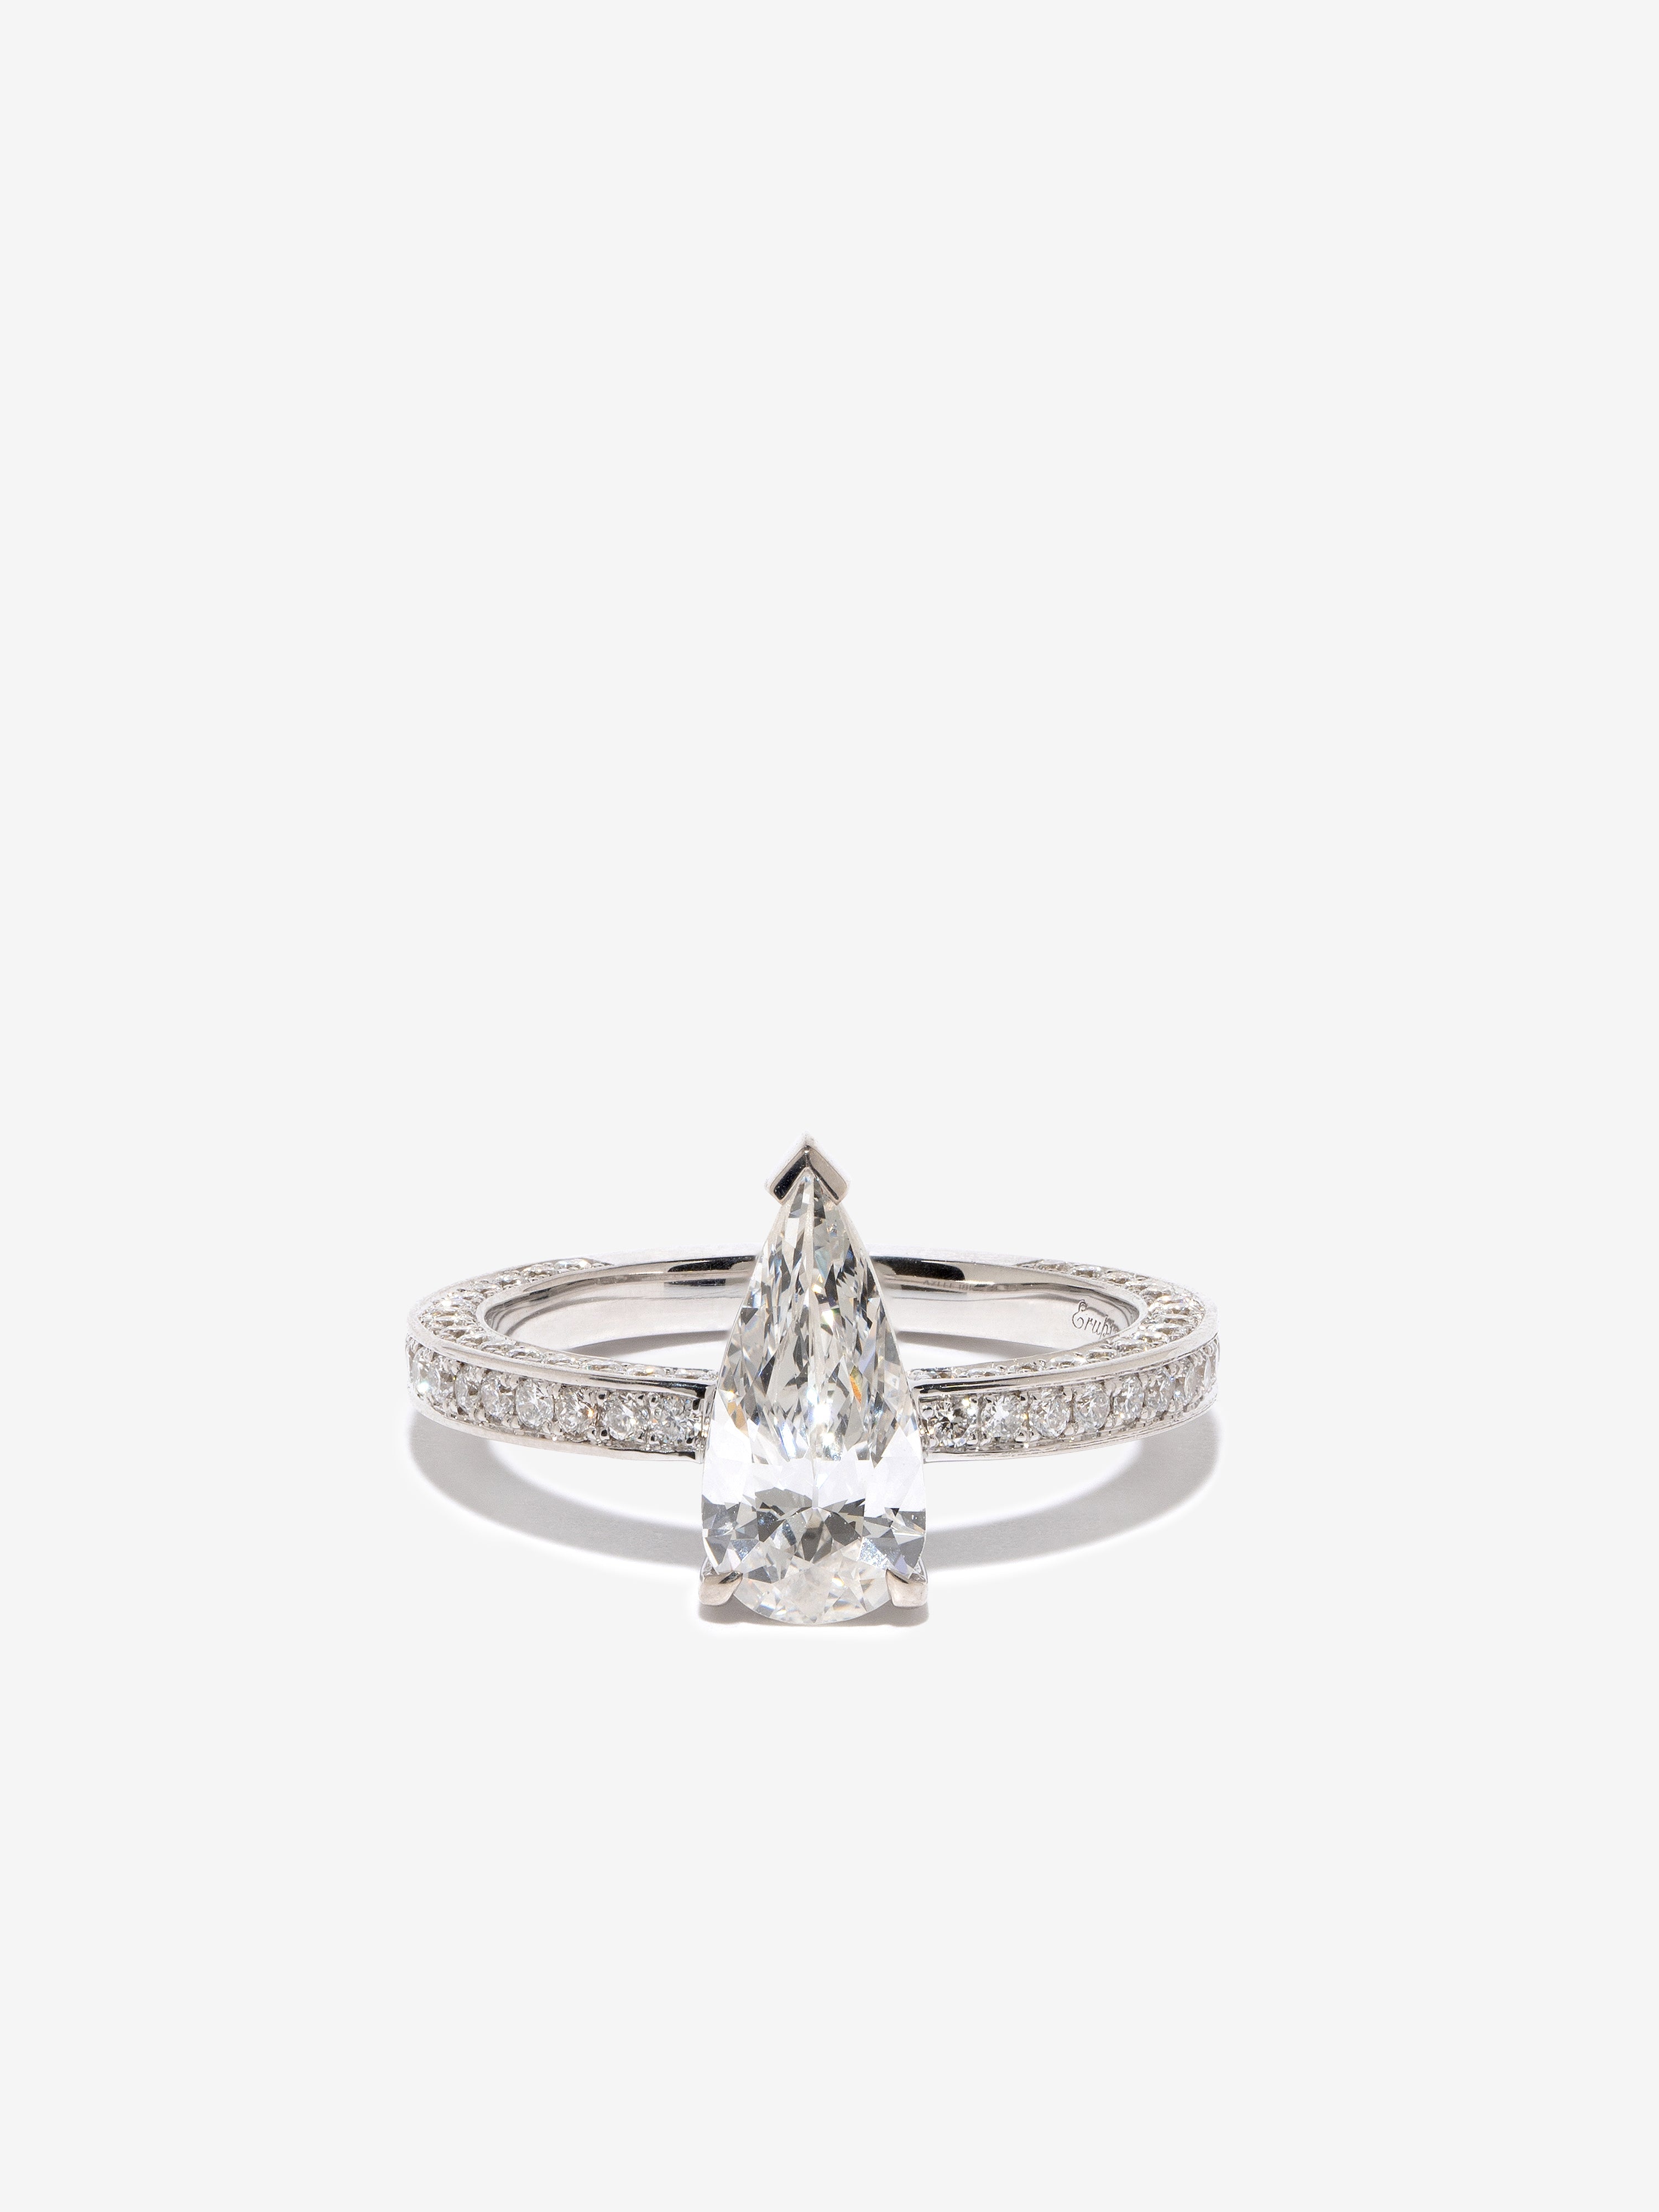 Vintage Pear Diamond in Prongs with All Over Diamond Setting